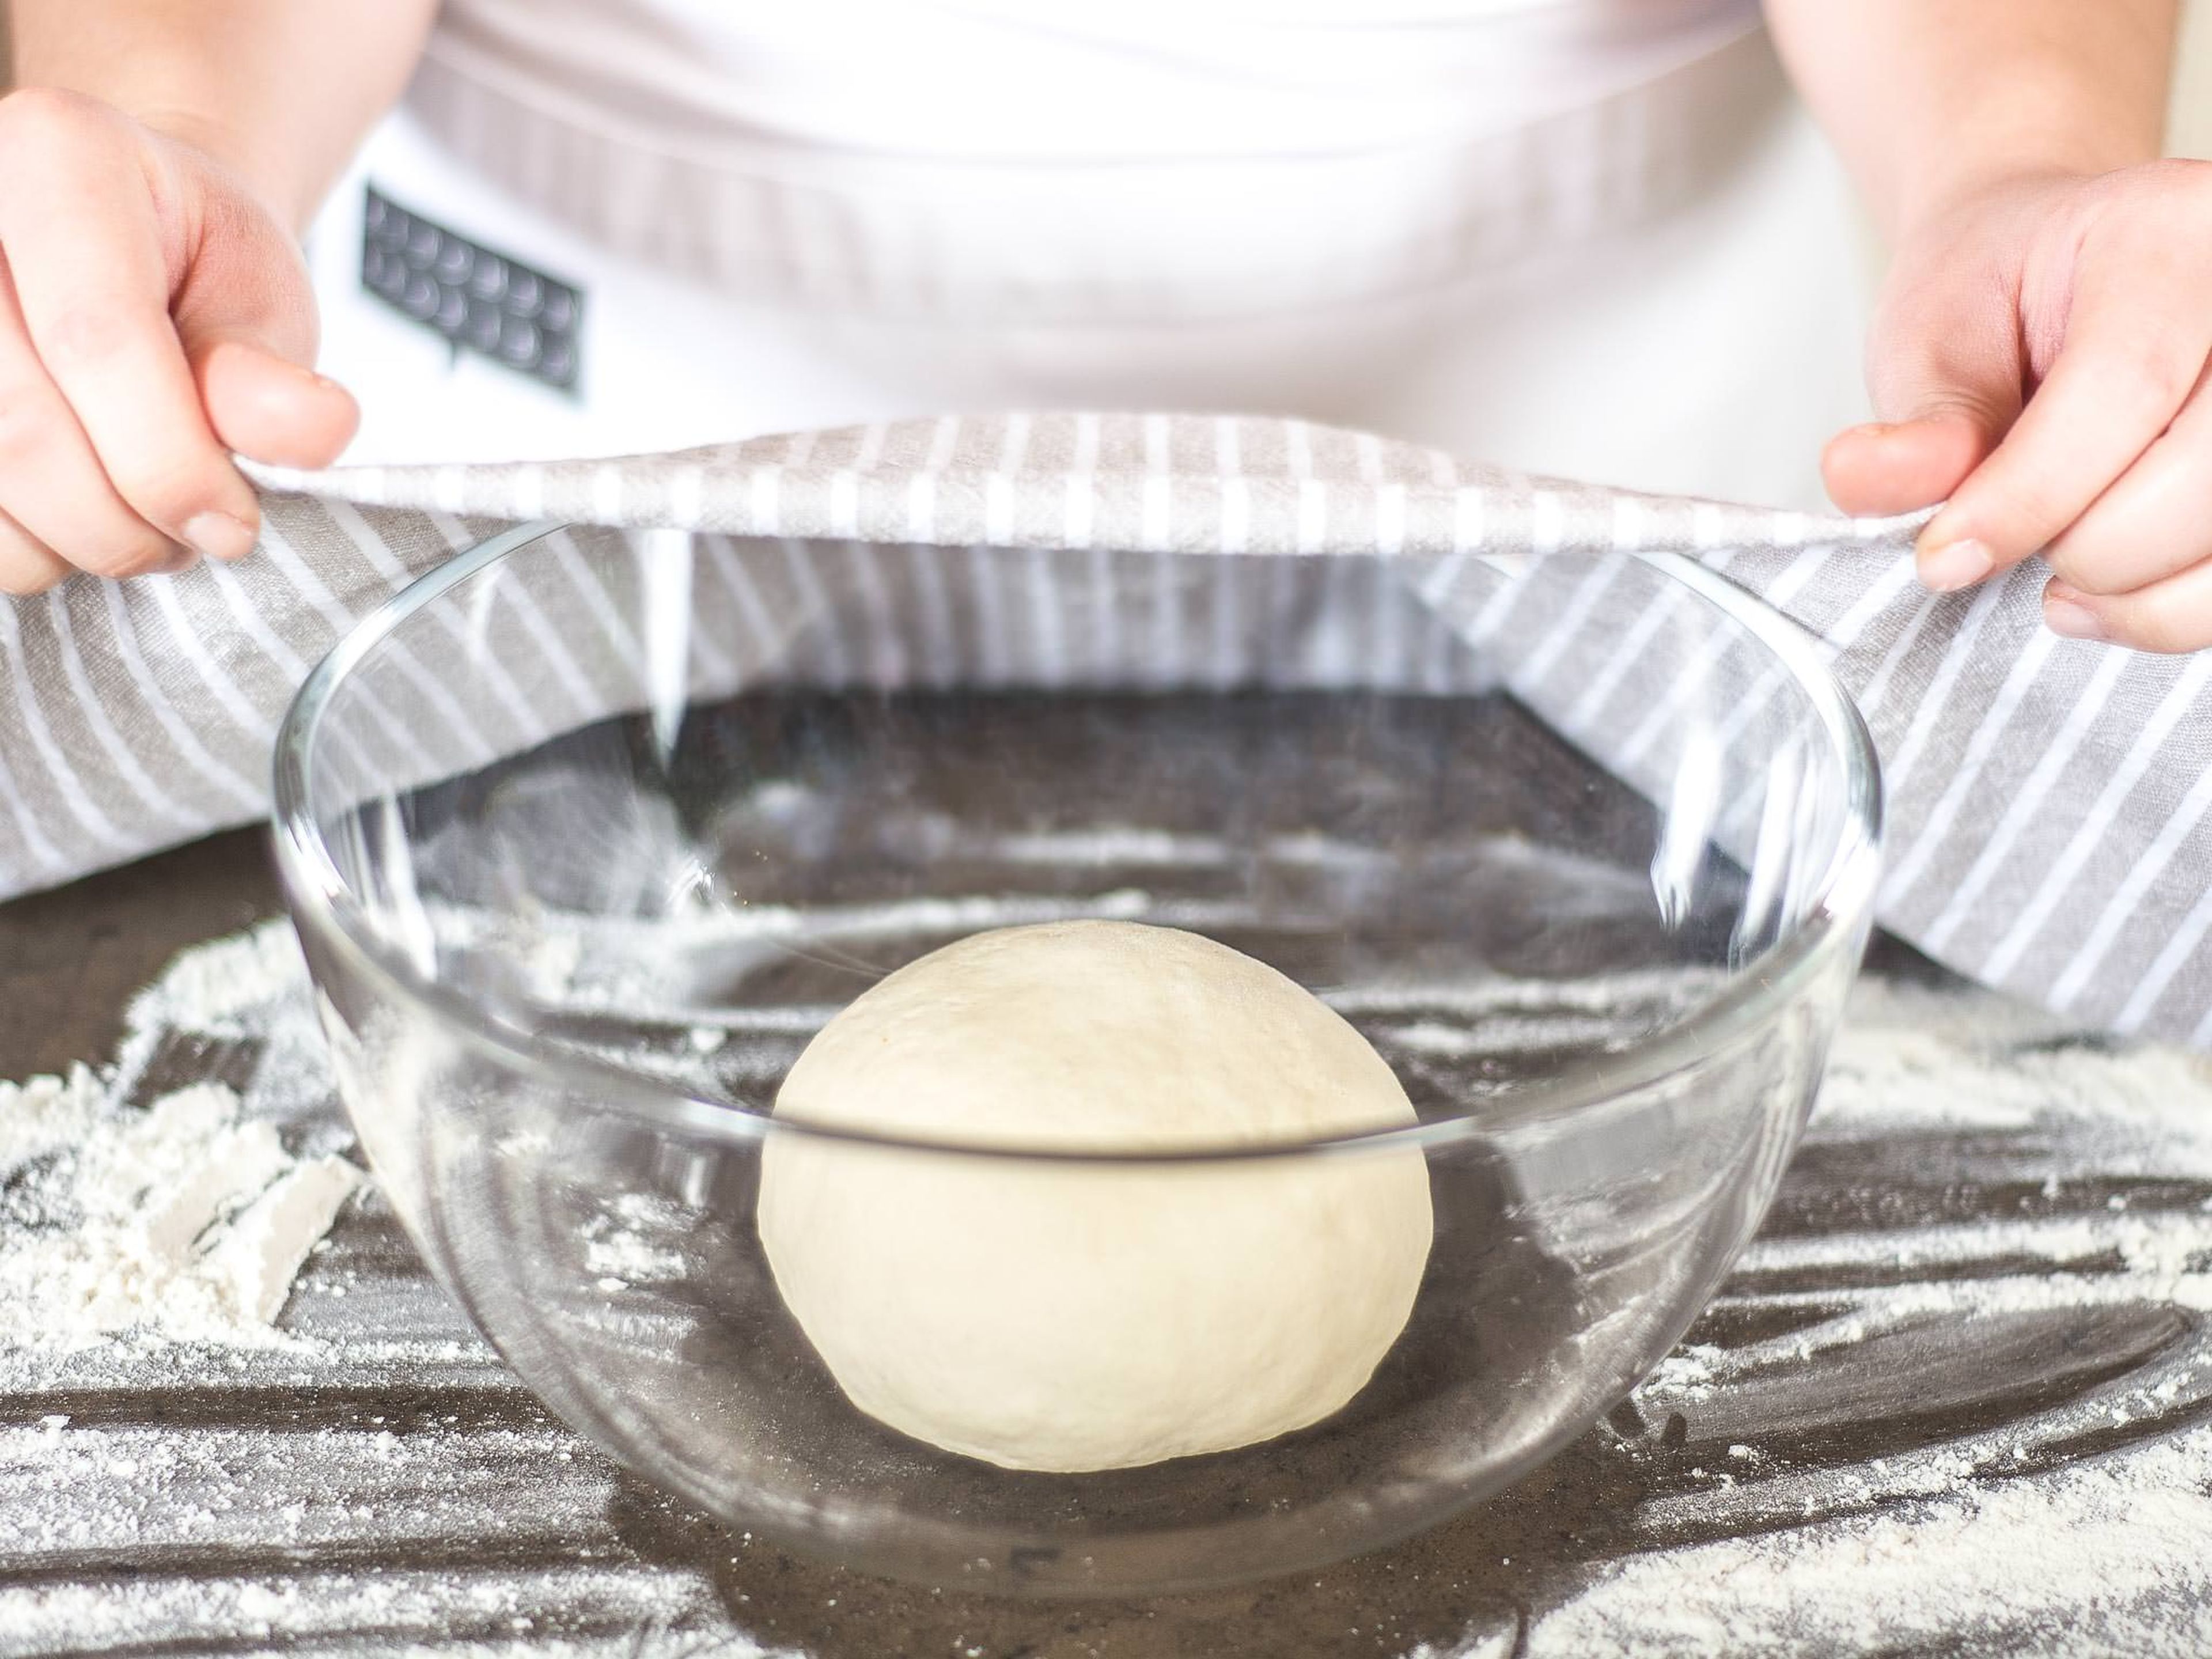 Cover the dough with a kitchen towel and allow to rise in a warm place for approx. 1–2 hrs., until it has doubled in size.